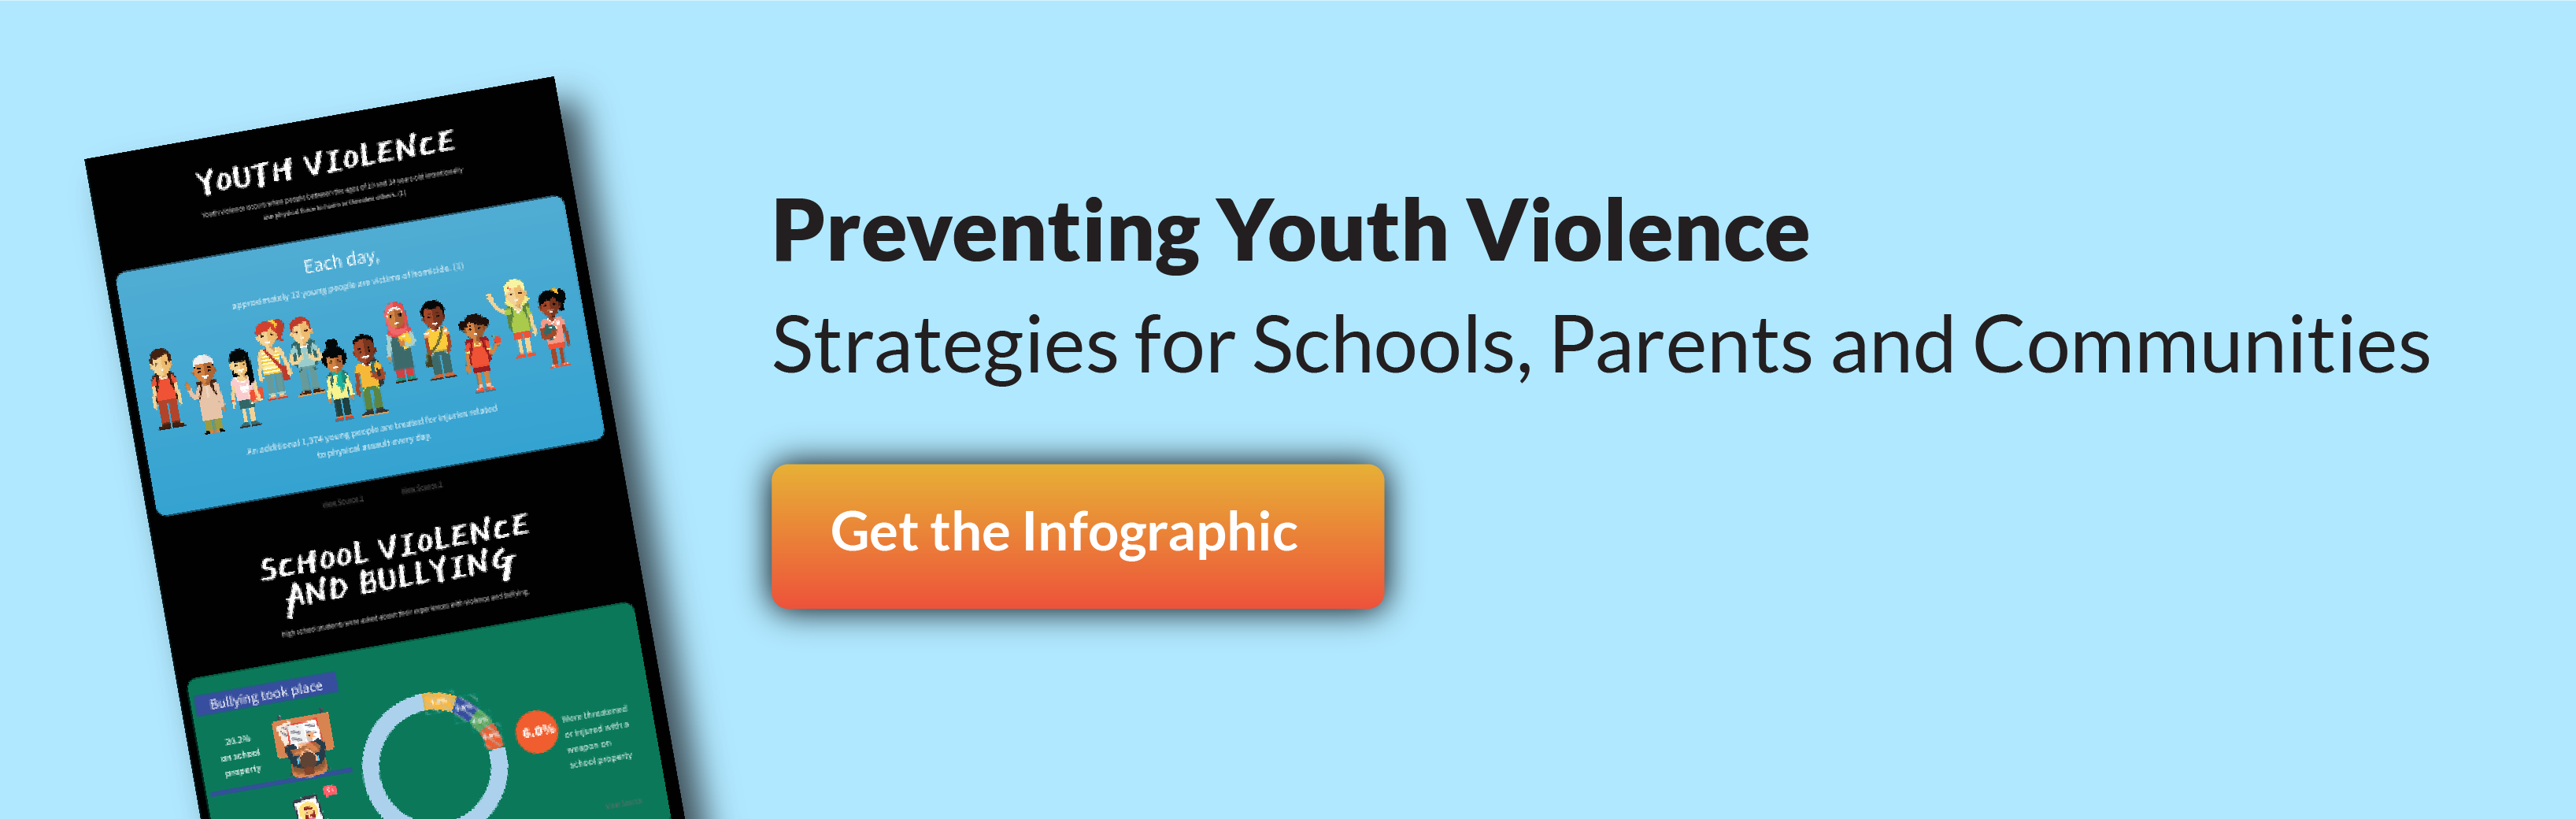 infographic-preventing-youth-violence-blog